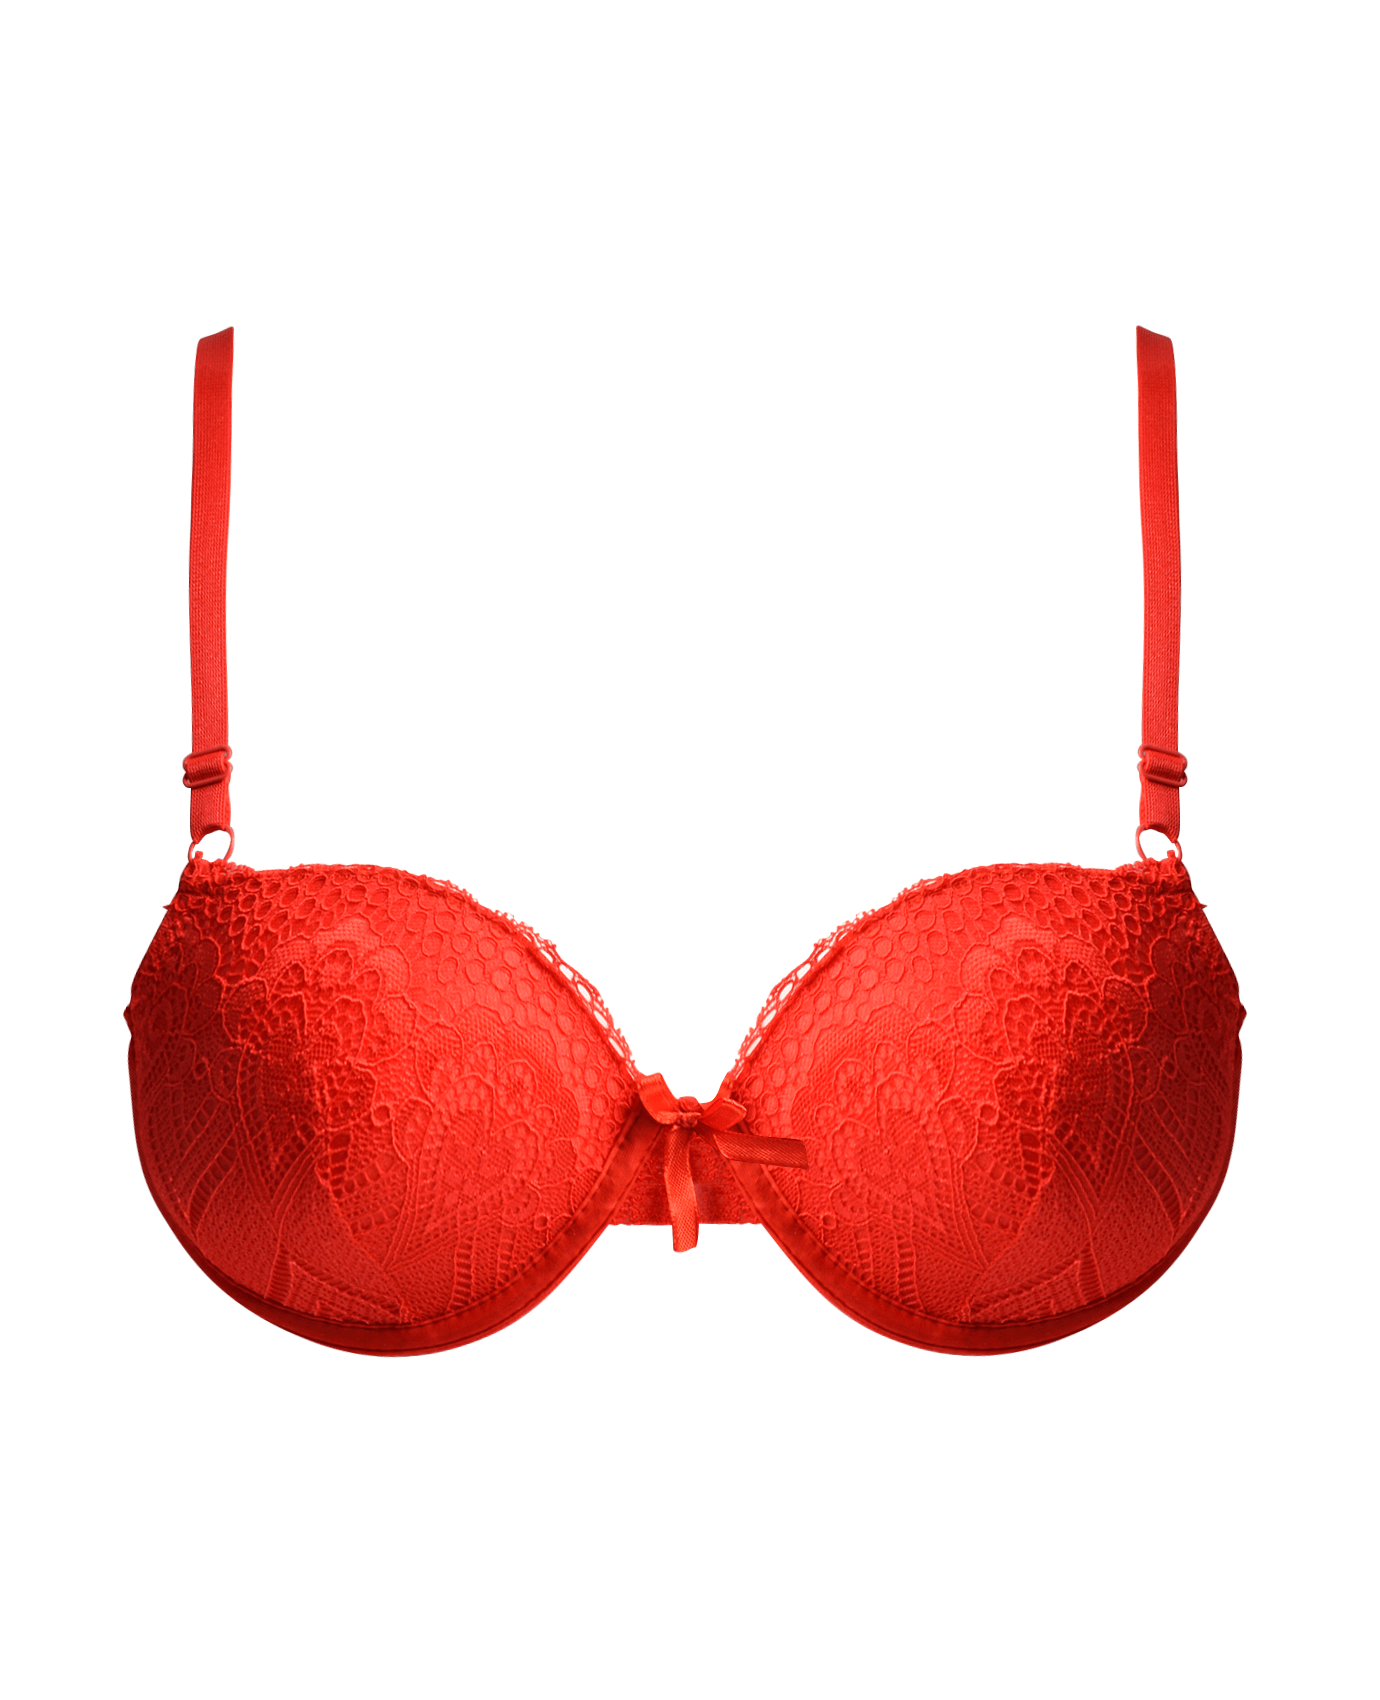 Pepper Lace Lift Up Bra in Cayenne Red , 34A.NWOT